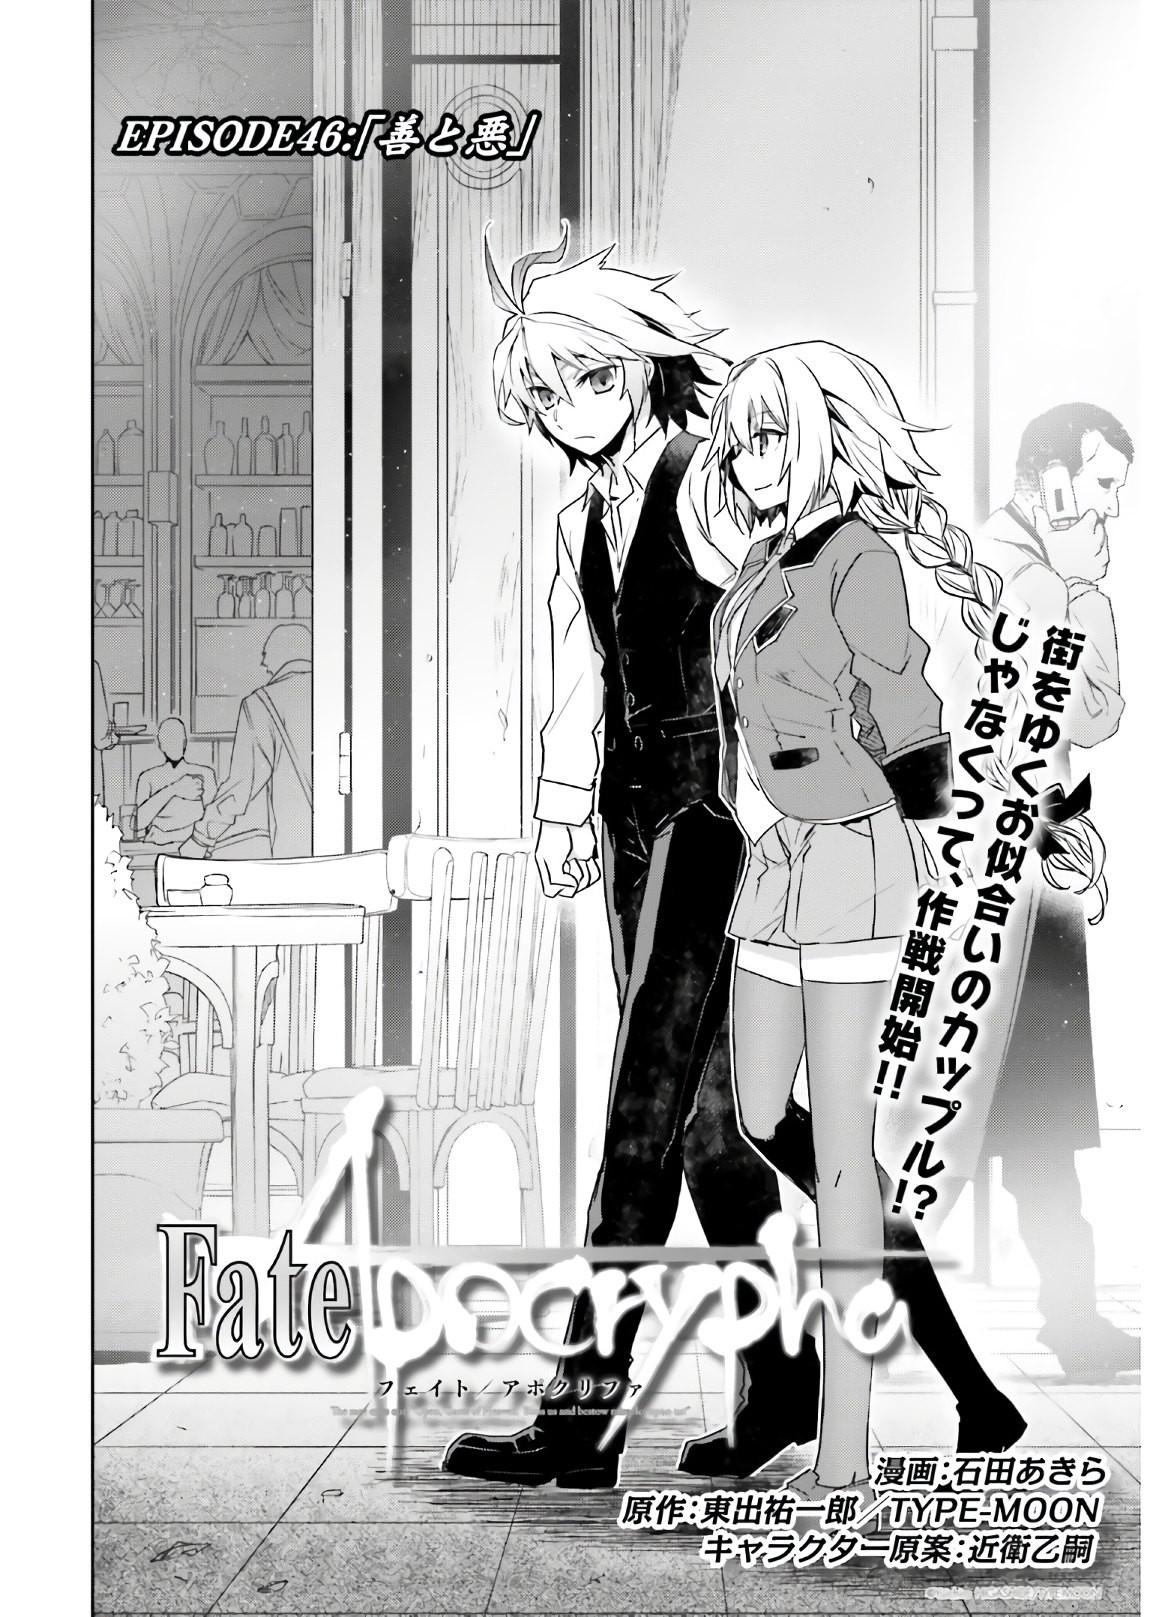 Fate-Apocrypha - Chapter 46 - Page 2